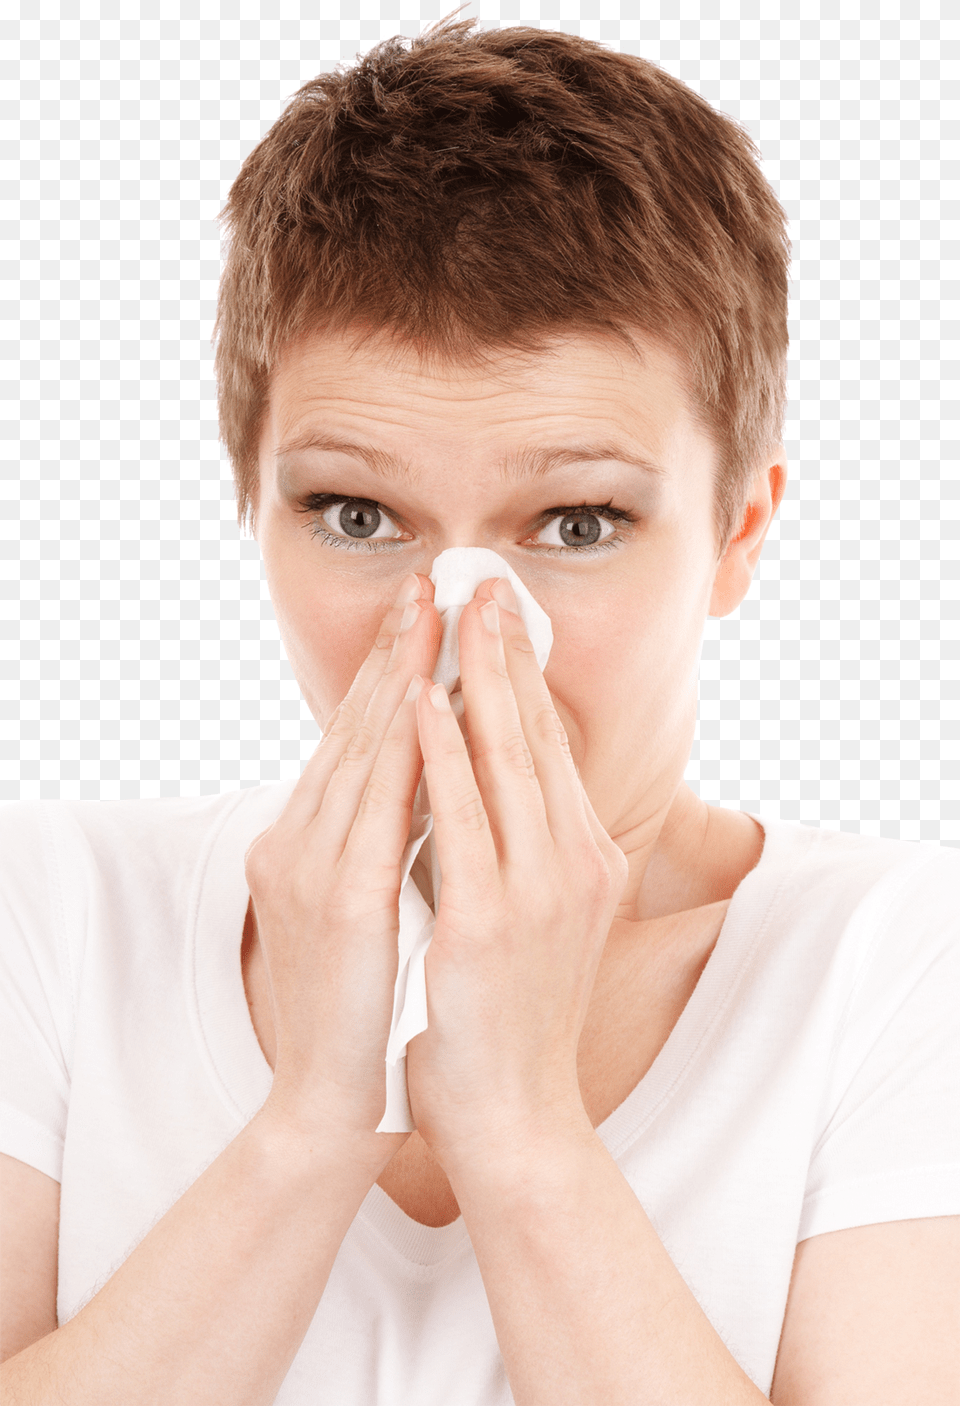 Pngpix Com Woman With Allergy Symptom Blowing Nose With Tissue Image, Face, Head, Person, Boy Free Transparent Png